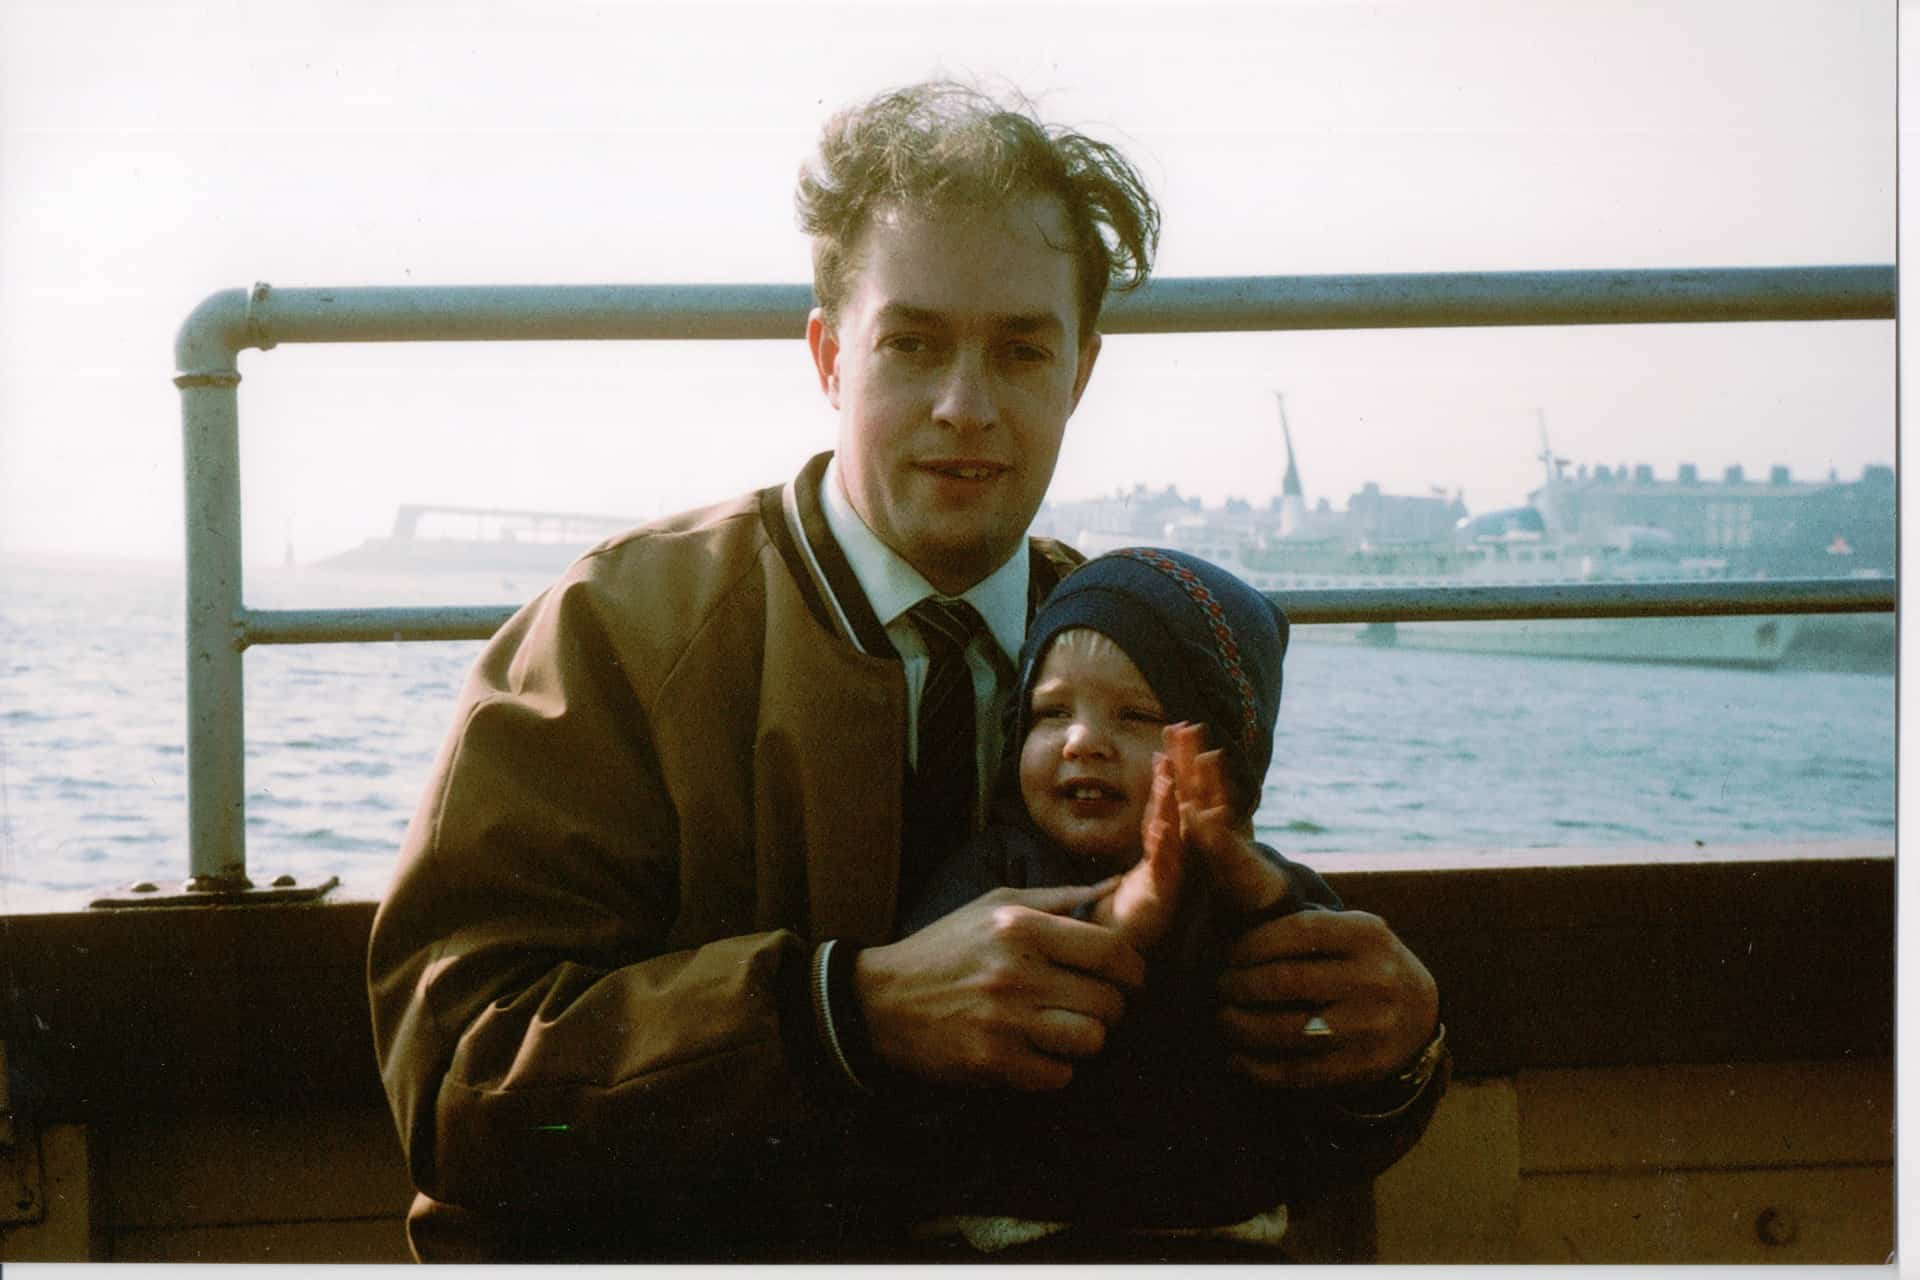 Conrad Collins and his son, Peter, on holiday together, late 1960s.